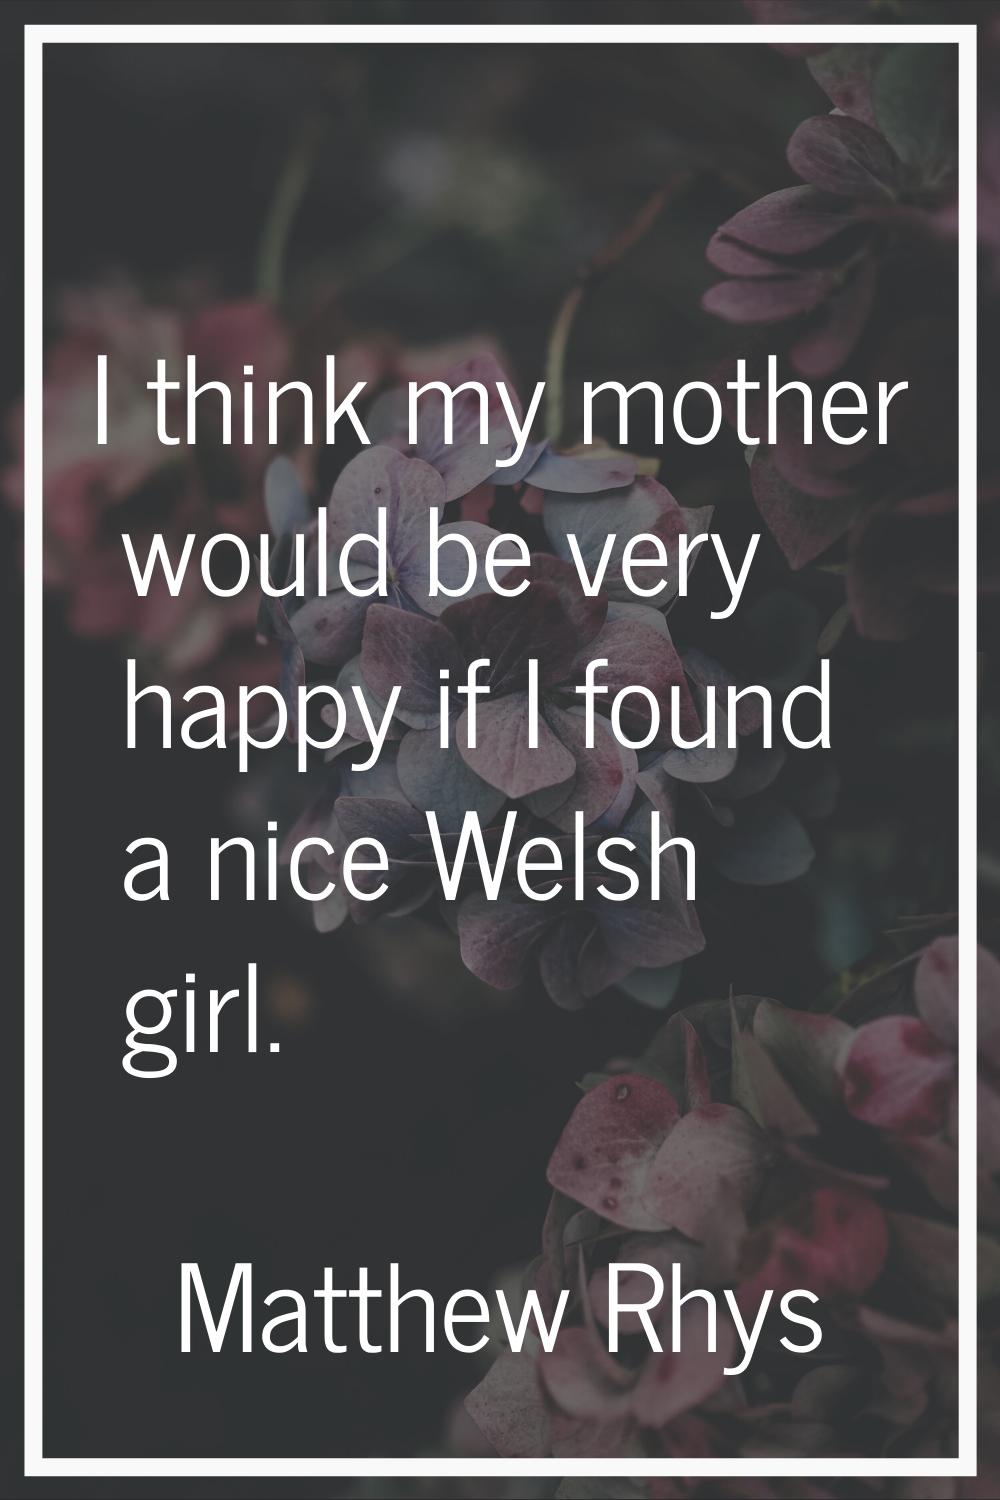 I think my mother would be very happy if I found a nice Welsh girl.